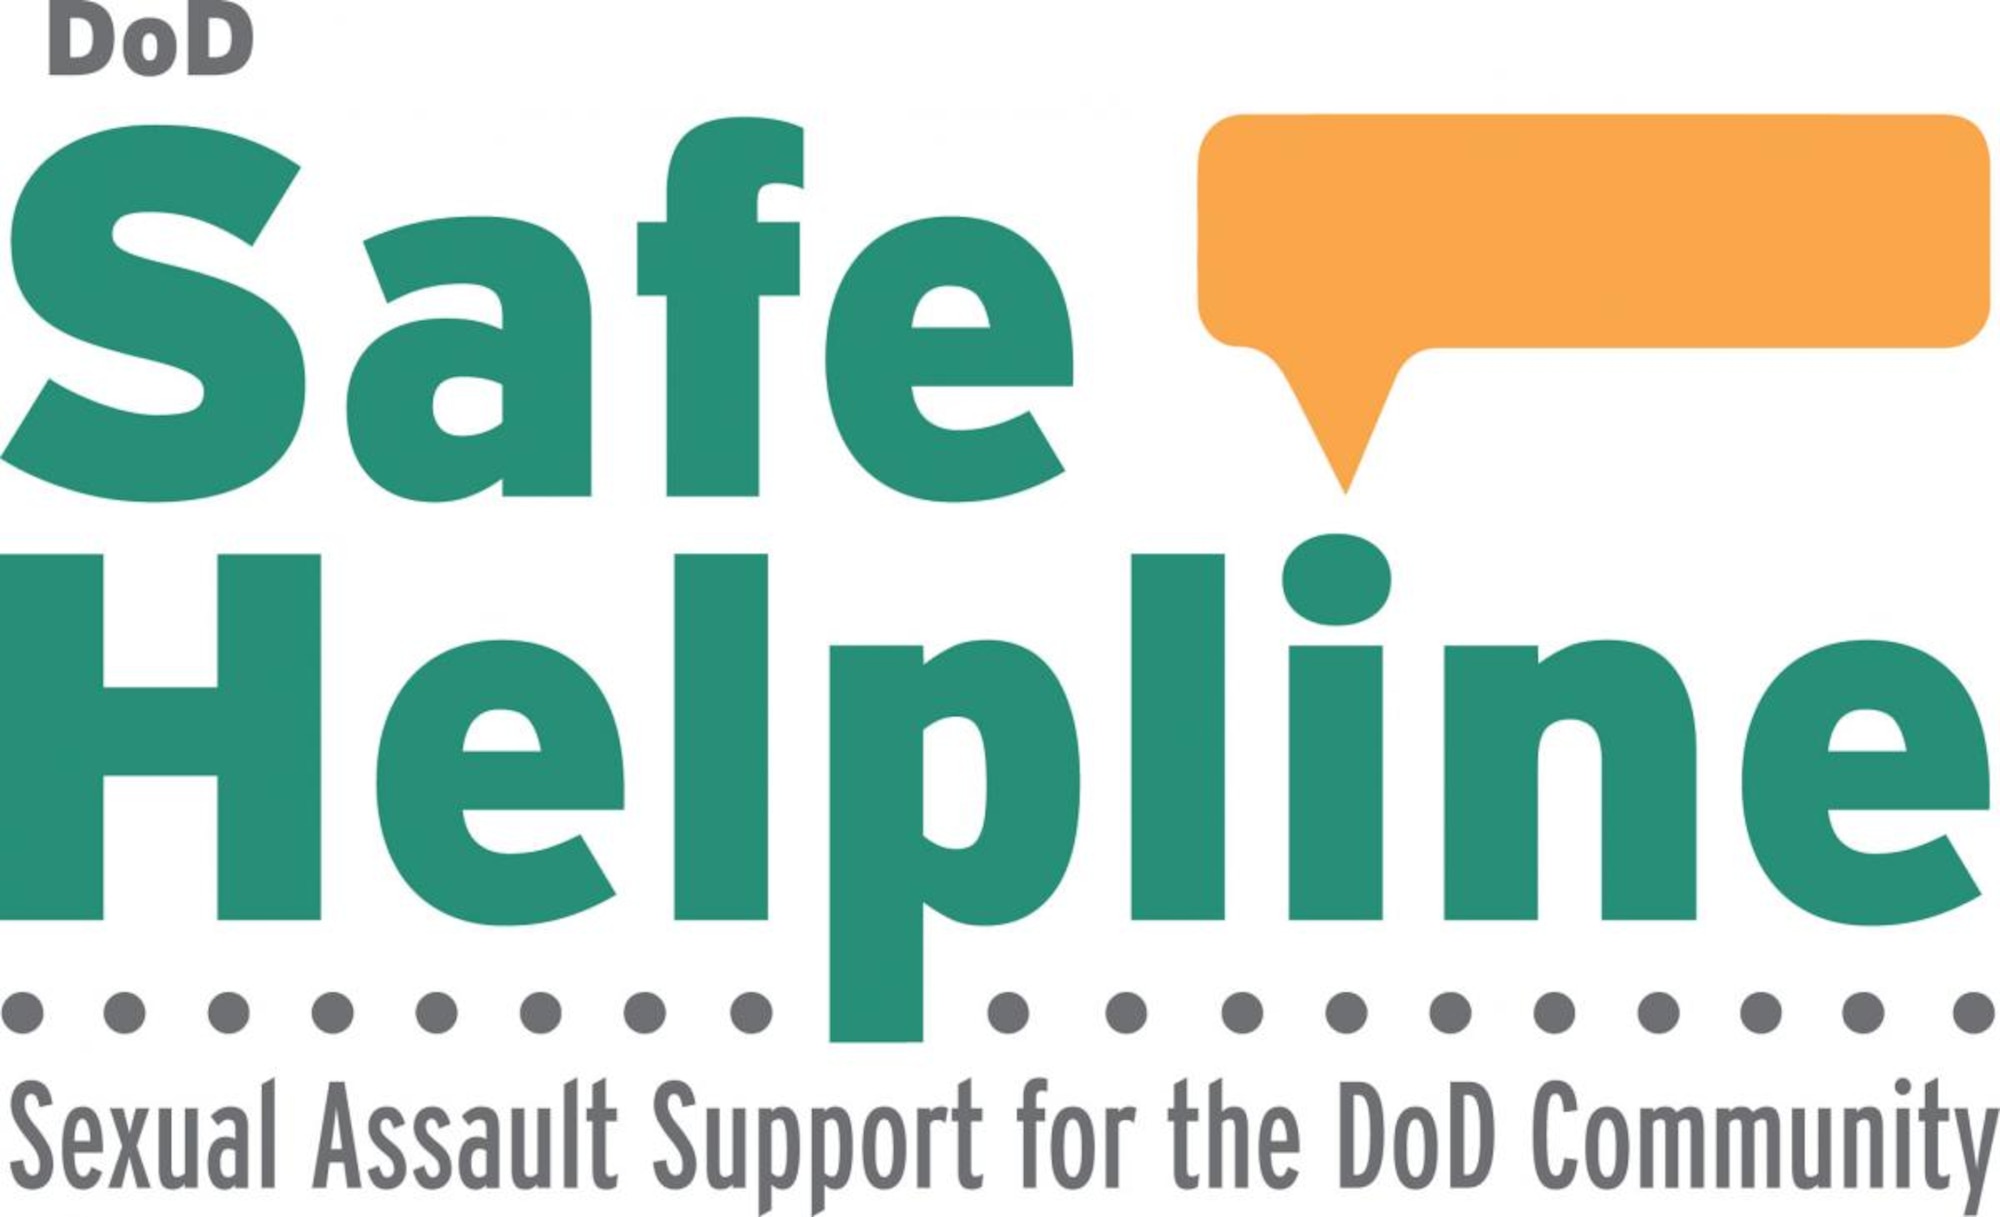 DoD Safe Helpline (Sexual Assault Support for the DoD Community) graphic